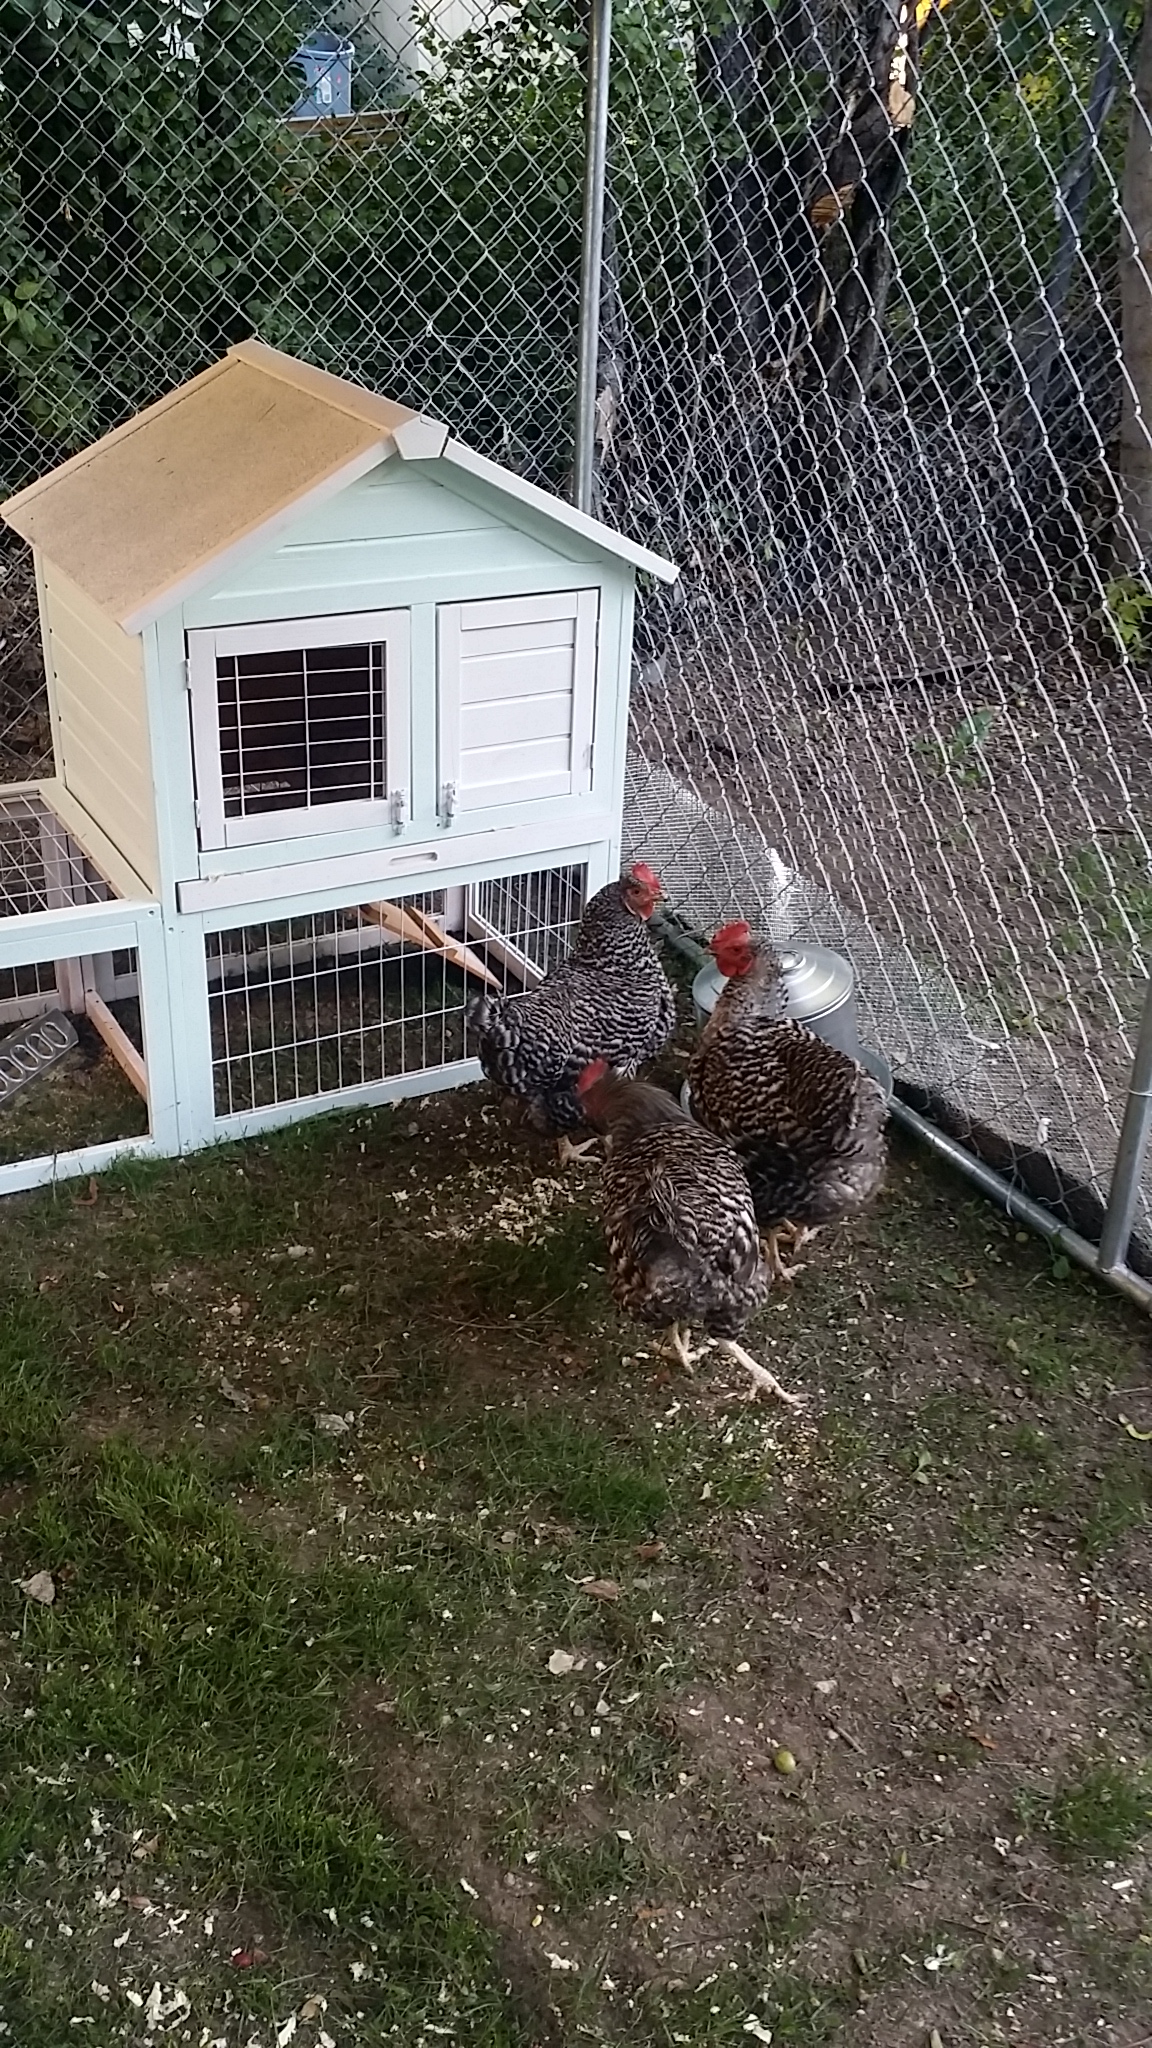 My ladies! This is day 1, July 1, 2014. As you can see they JUST moved in because the grass is still there!